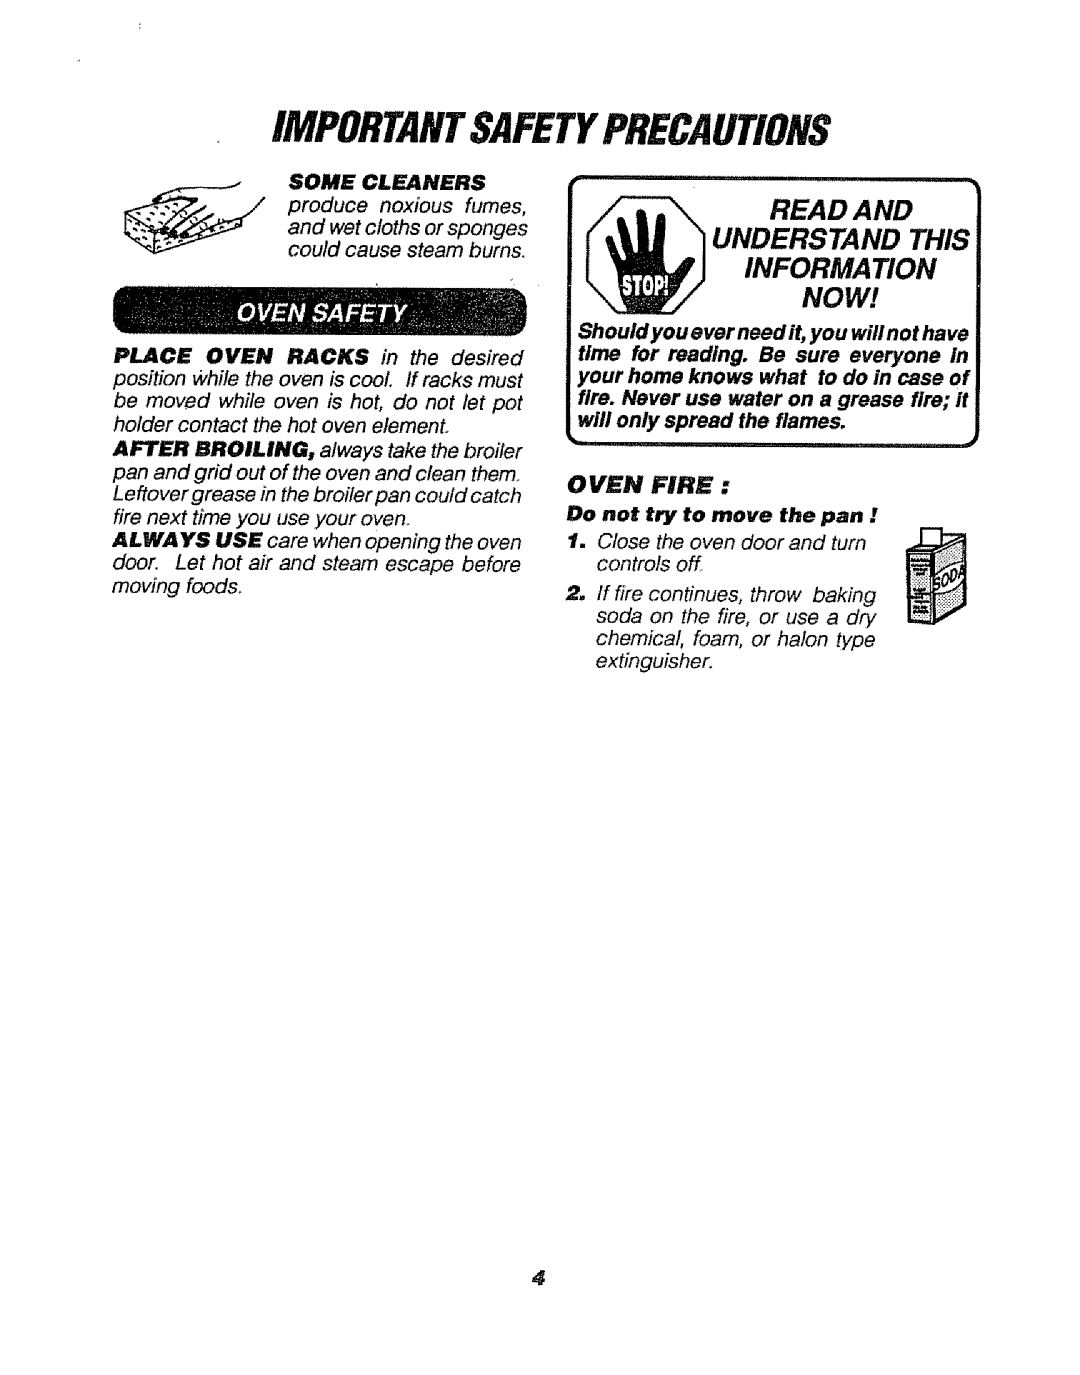 Sears 911. 47169 owner manual Importantsafetyprecautions, Some Cleaners, OVEN FIRE Do not try to move the pan 